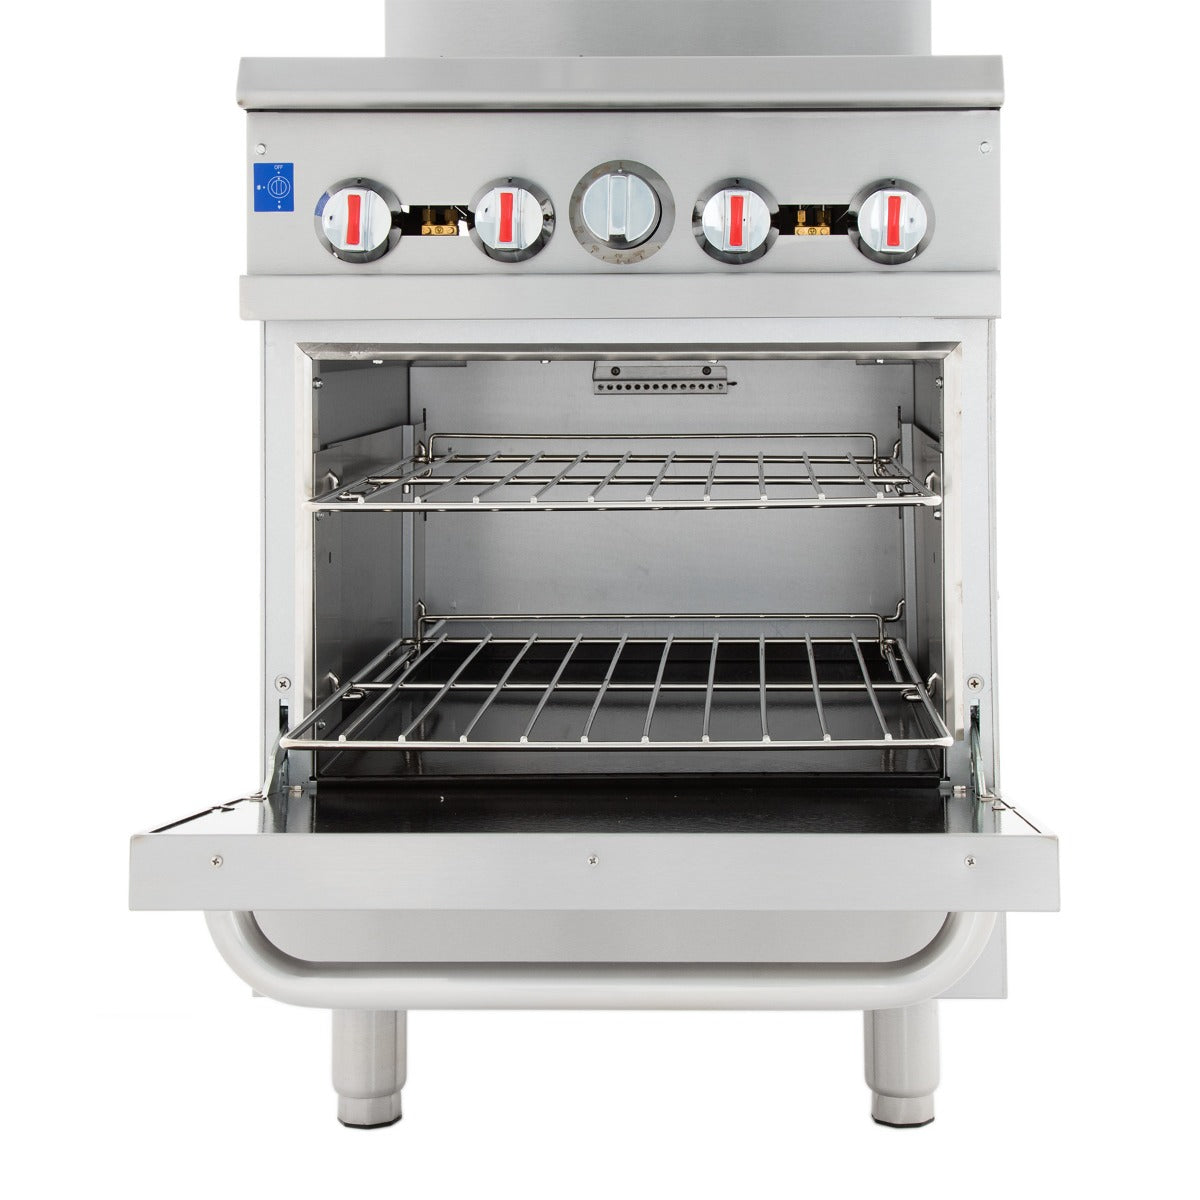 Empura EGR-24_NAT 24" Stainless Steel Commercial Gas Range with Oven, 4 Burners - Natural Gas, 150,000 BTU